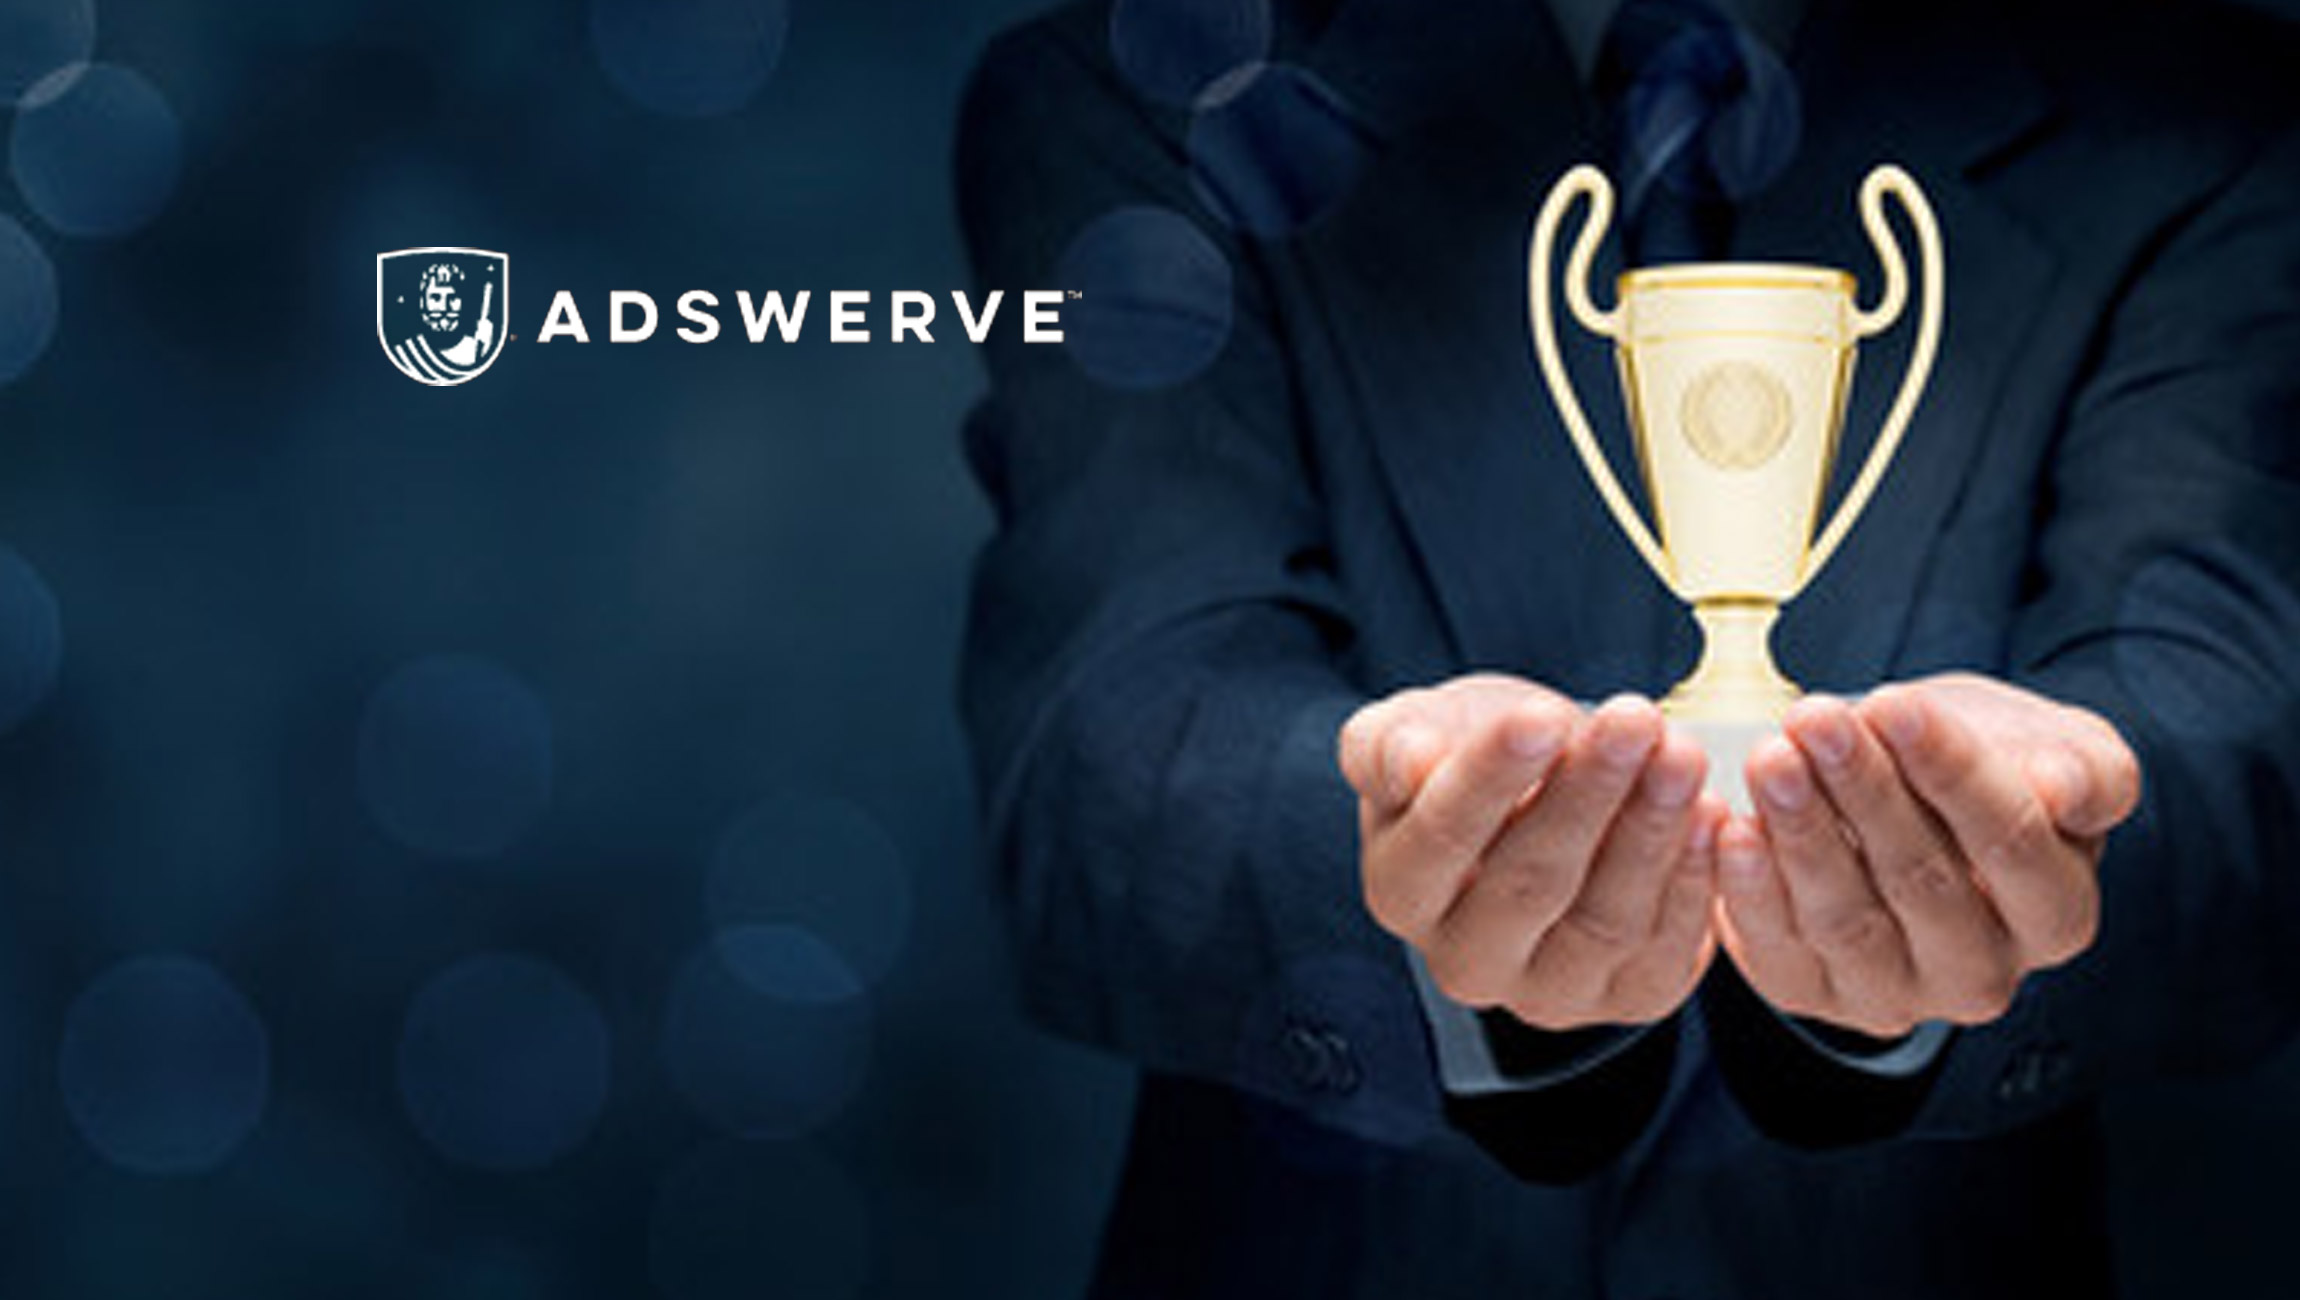 Adswerve’s Industry-Leading Data Analytics and Workplace Culture Recognized With Top Honors 1